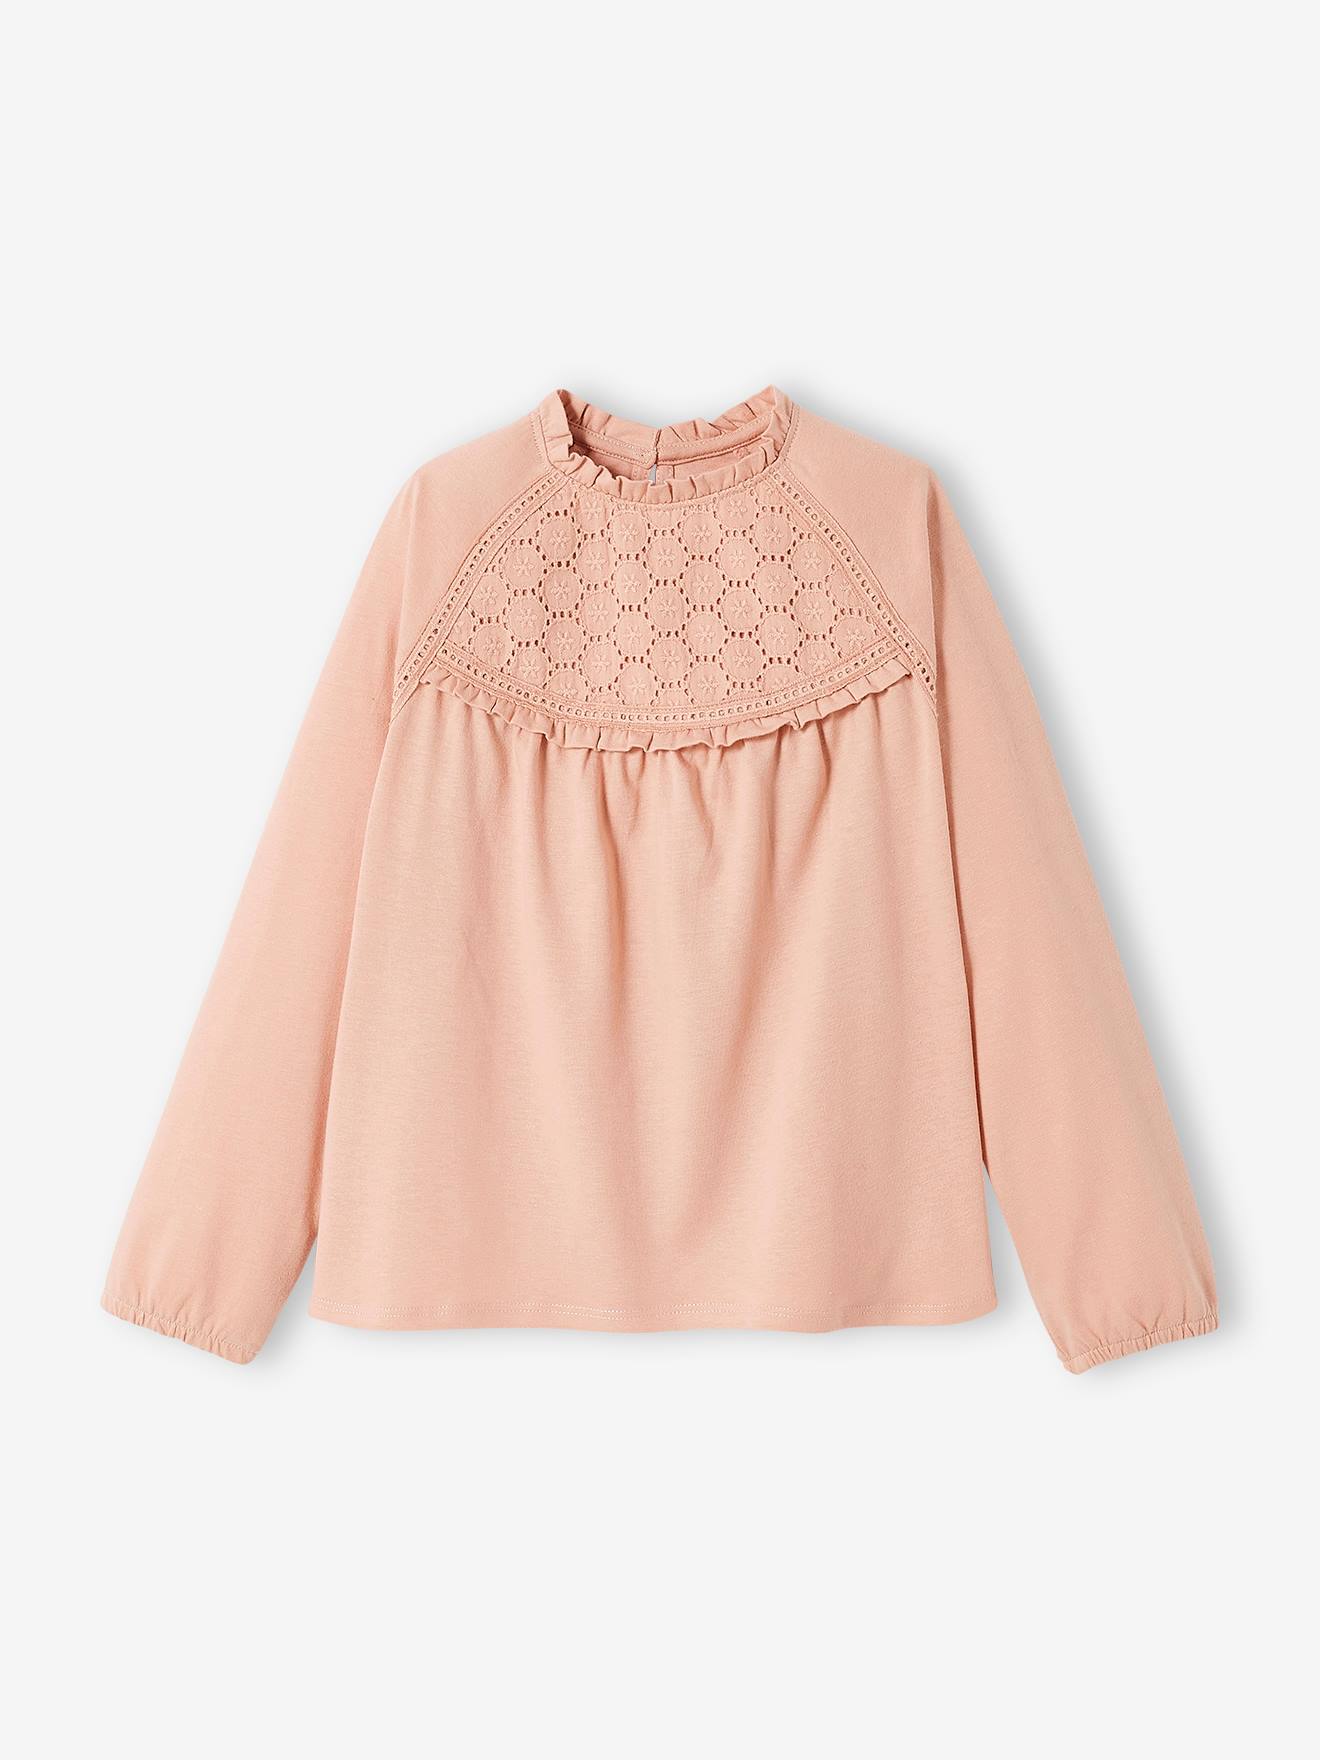 Top with Detail in Broderie Anglaise, for Girls pink medium solid